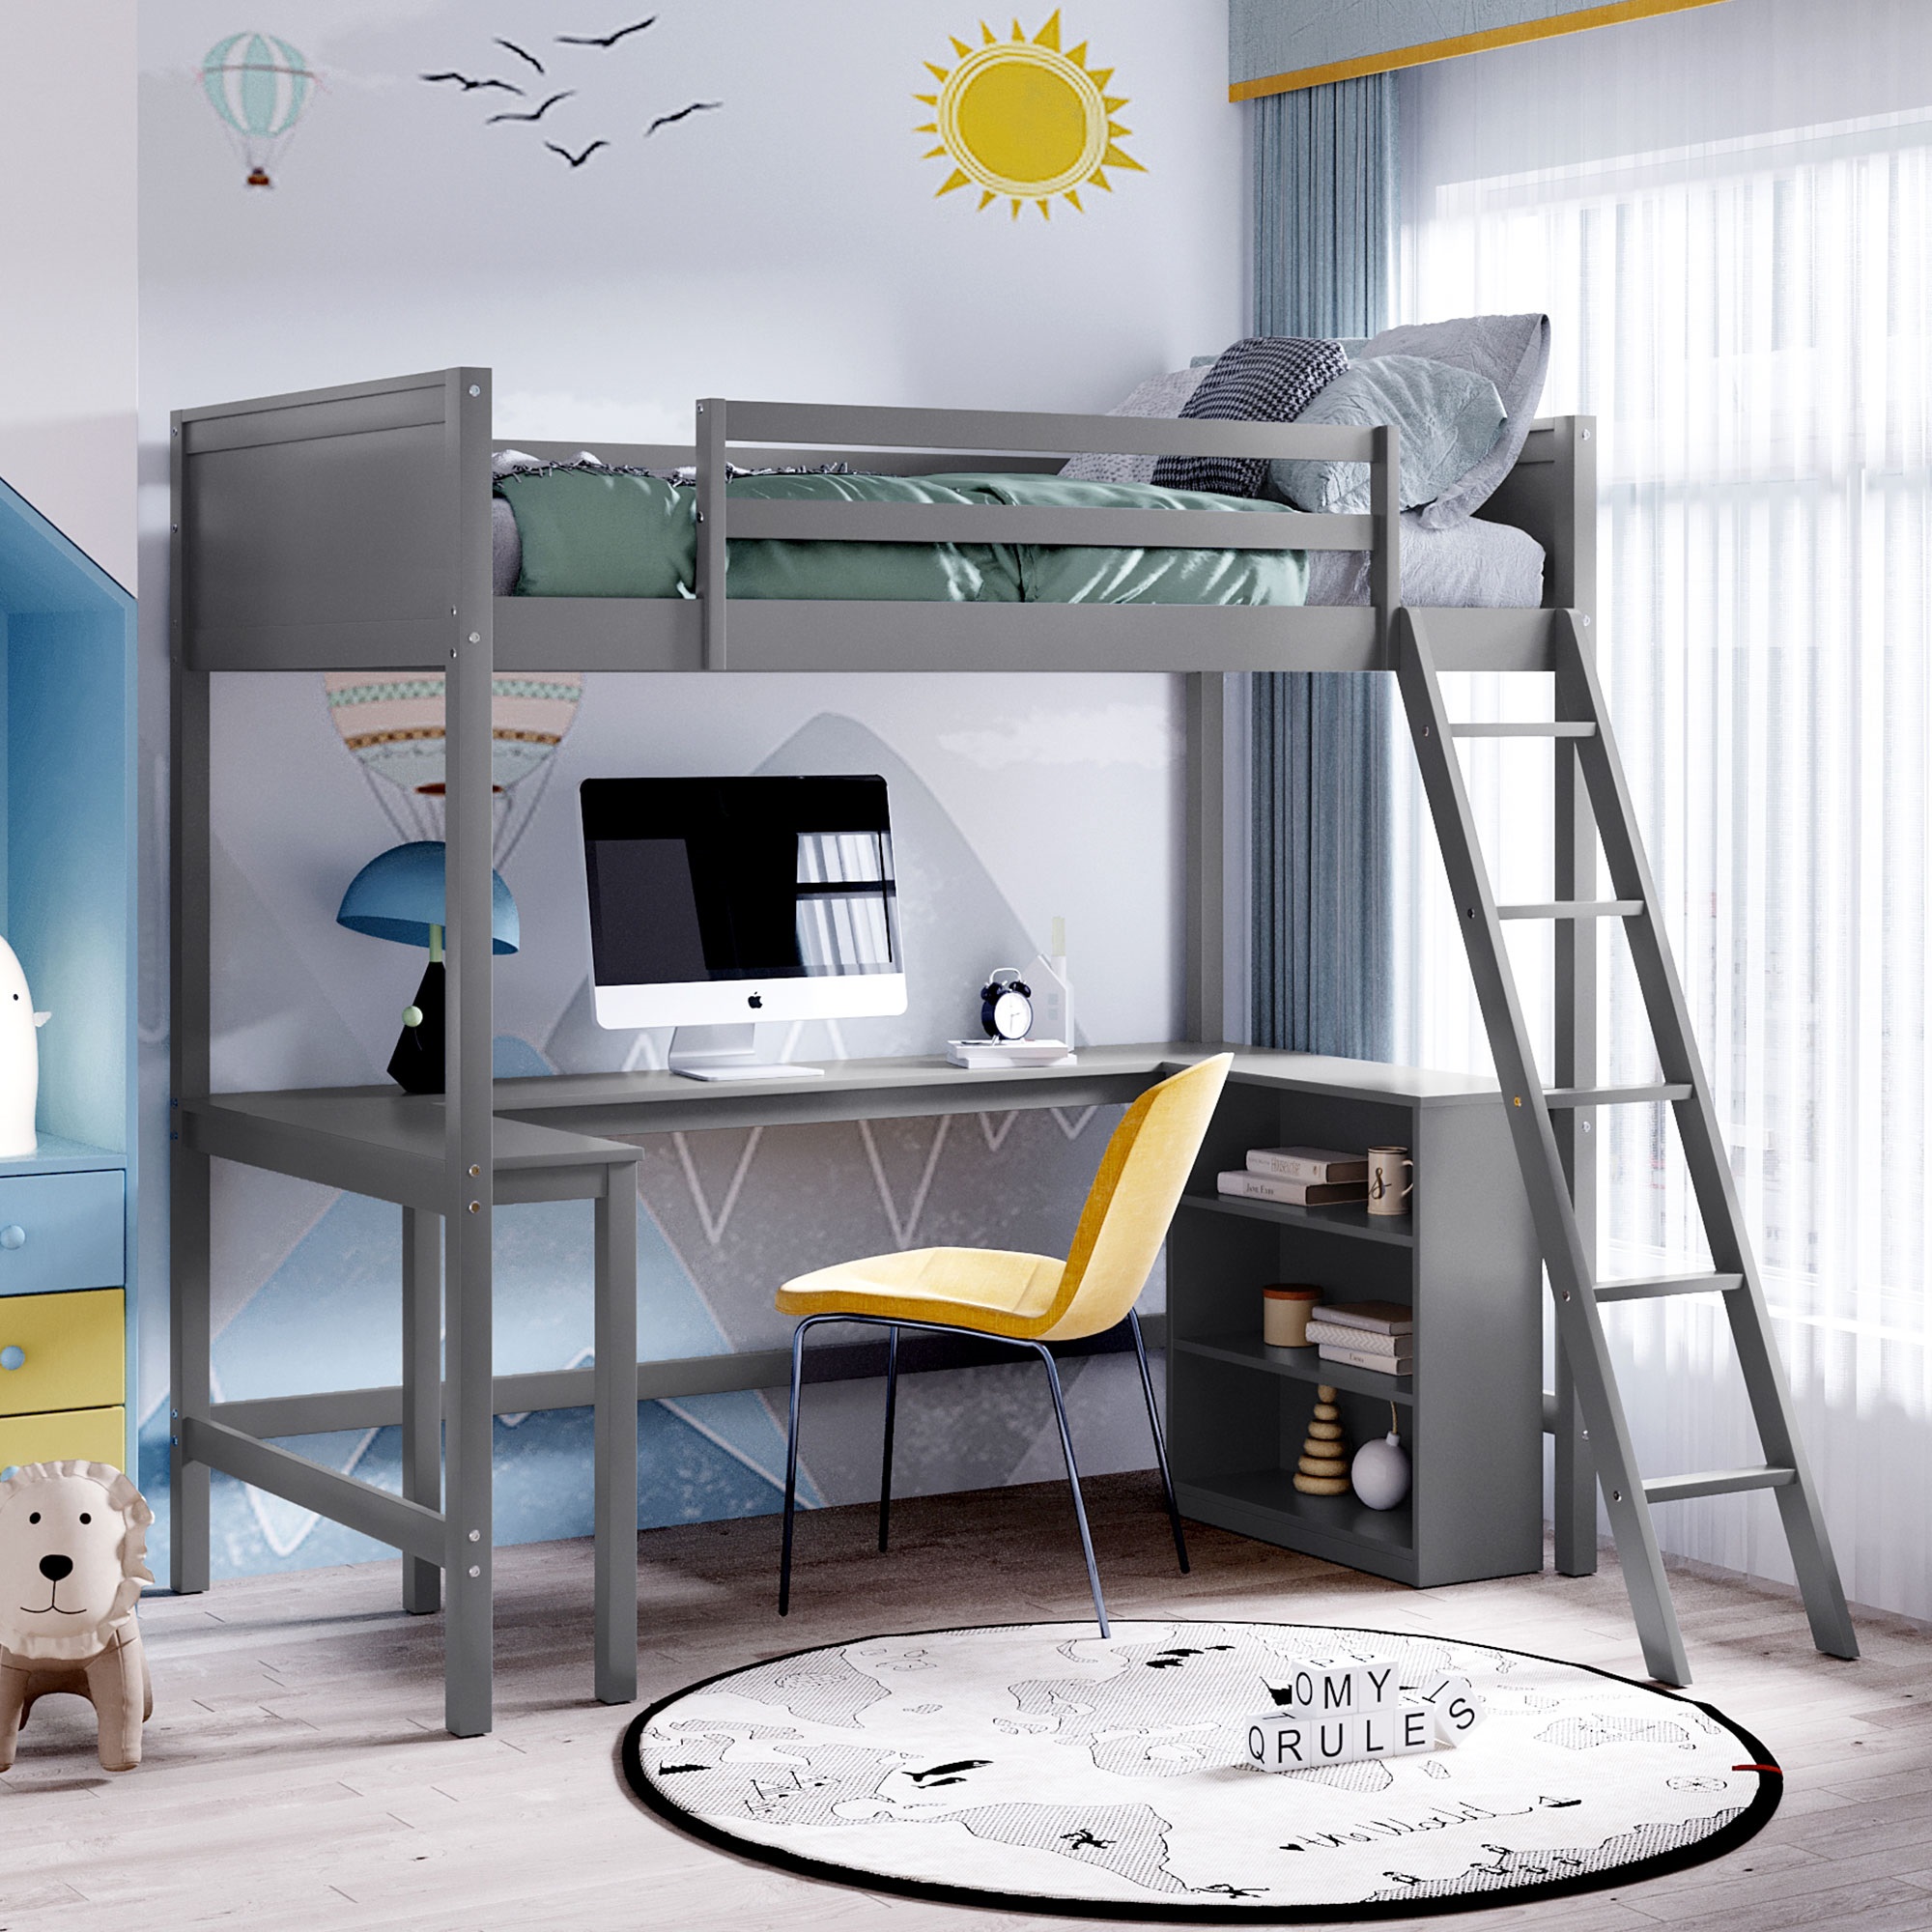 Twin size Loft Bed with Shelves and Desk, Wooden Loft Bed with Desk - Gray-Boyel Living